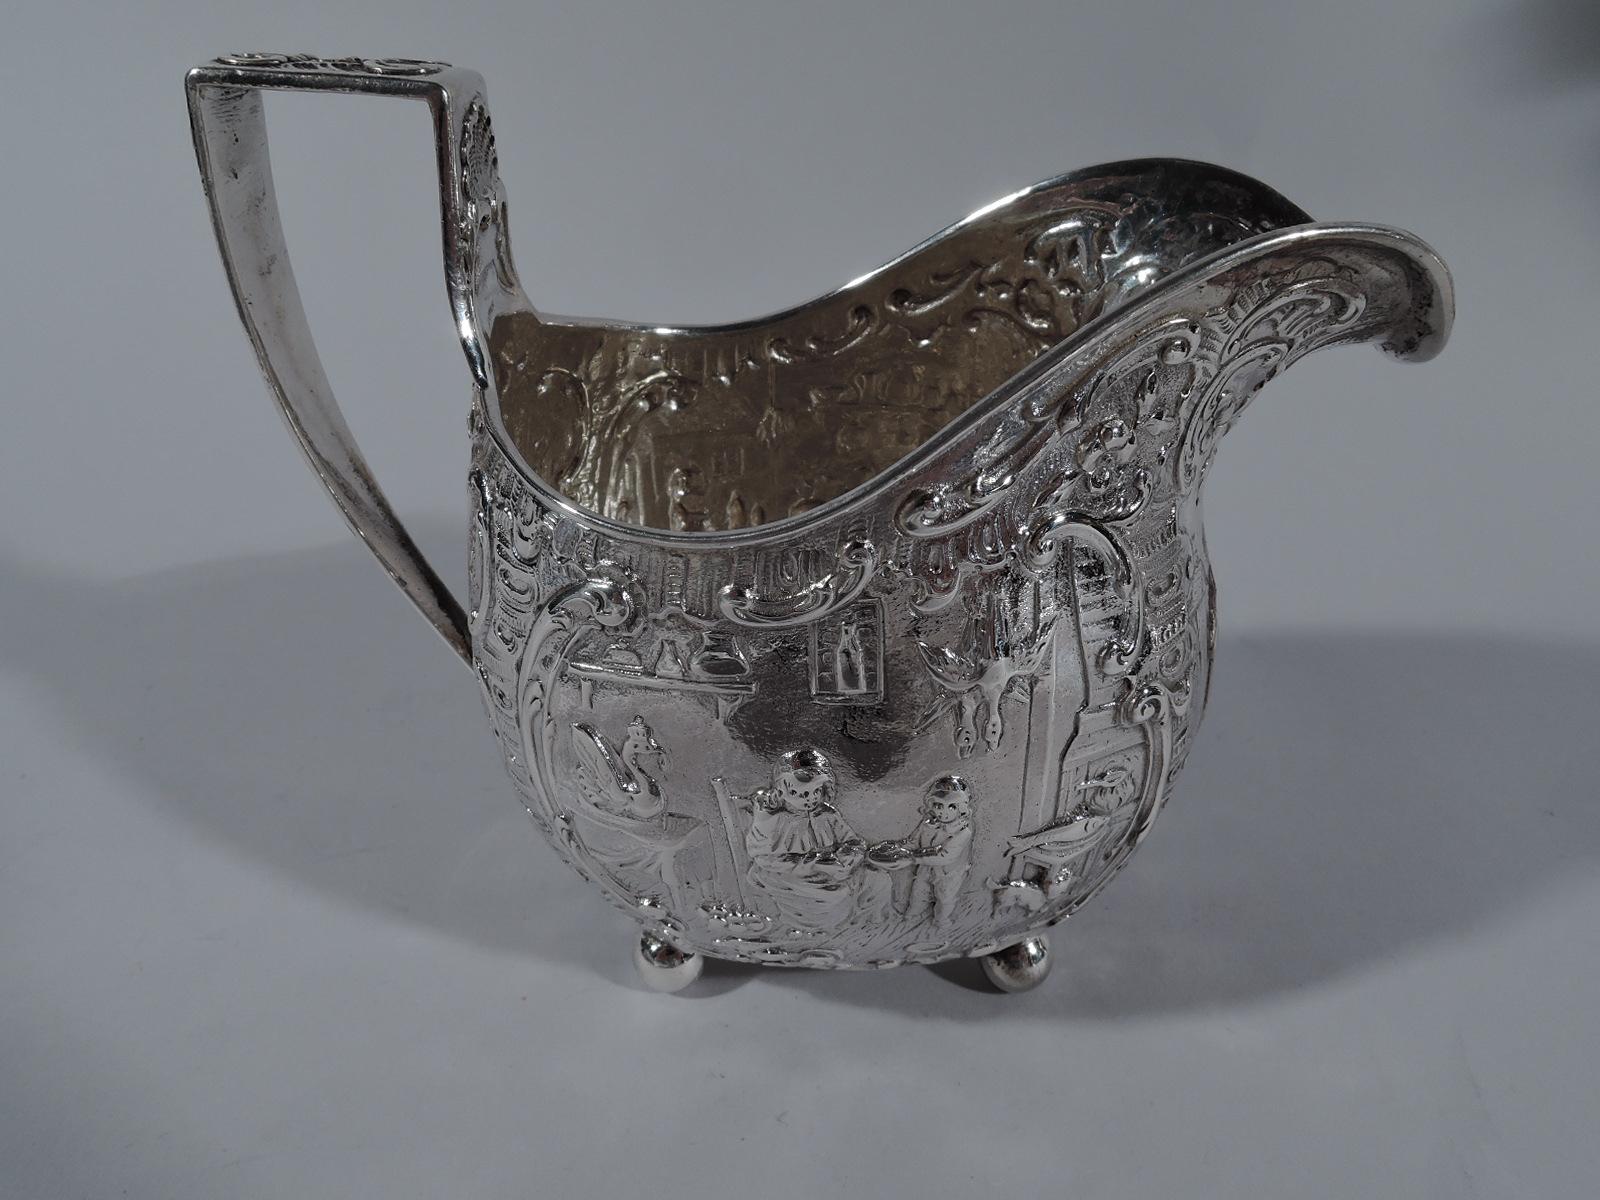 Pair of German sterling silver creamer and sugar, circa 1920. Curved bodies, corner ball supports, and high-looping scroll bracket handle. Creamer has u-form lip spout. Chased olden-days scenes with country folk at home with blazing hearth and